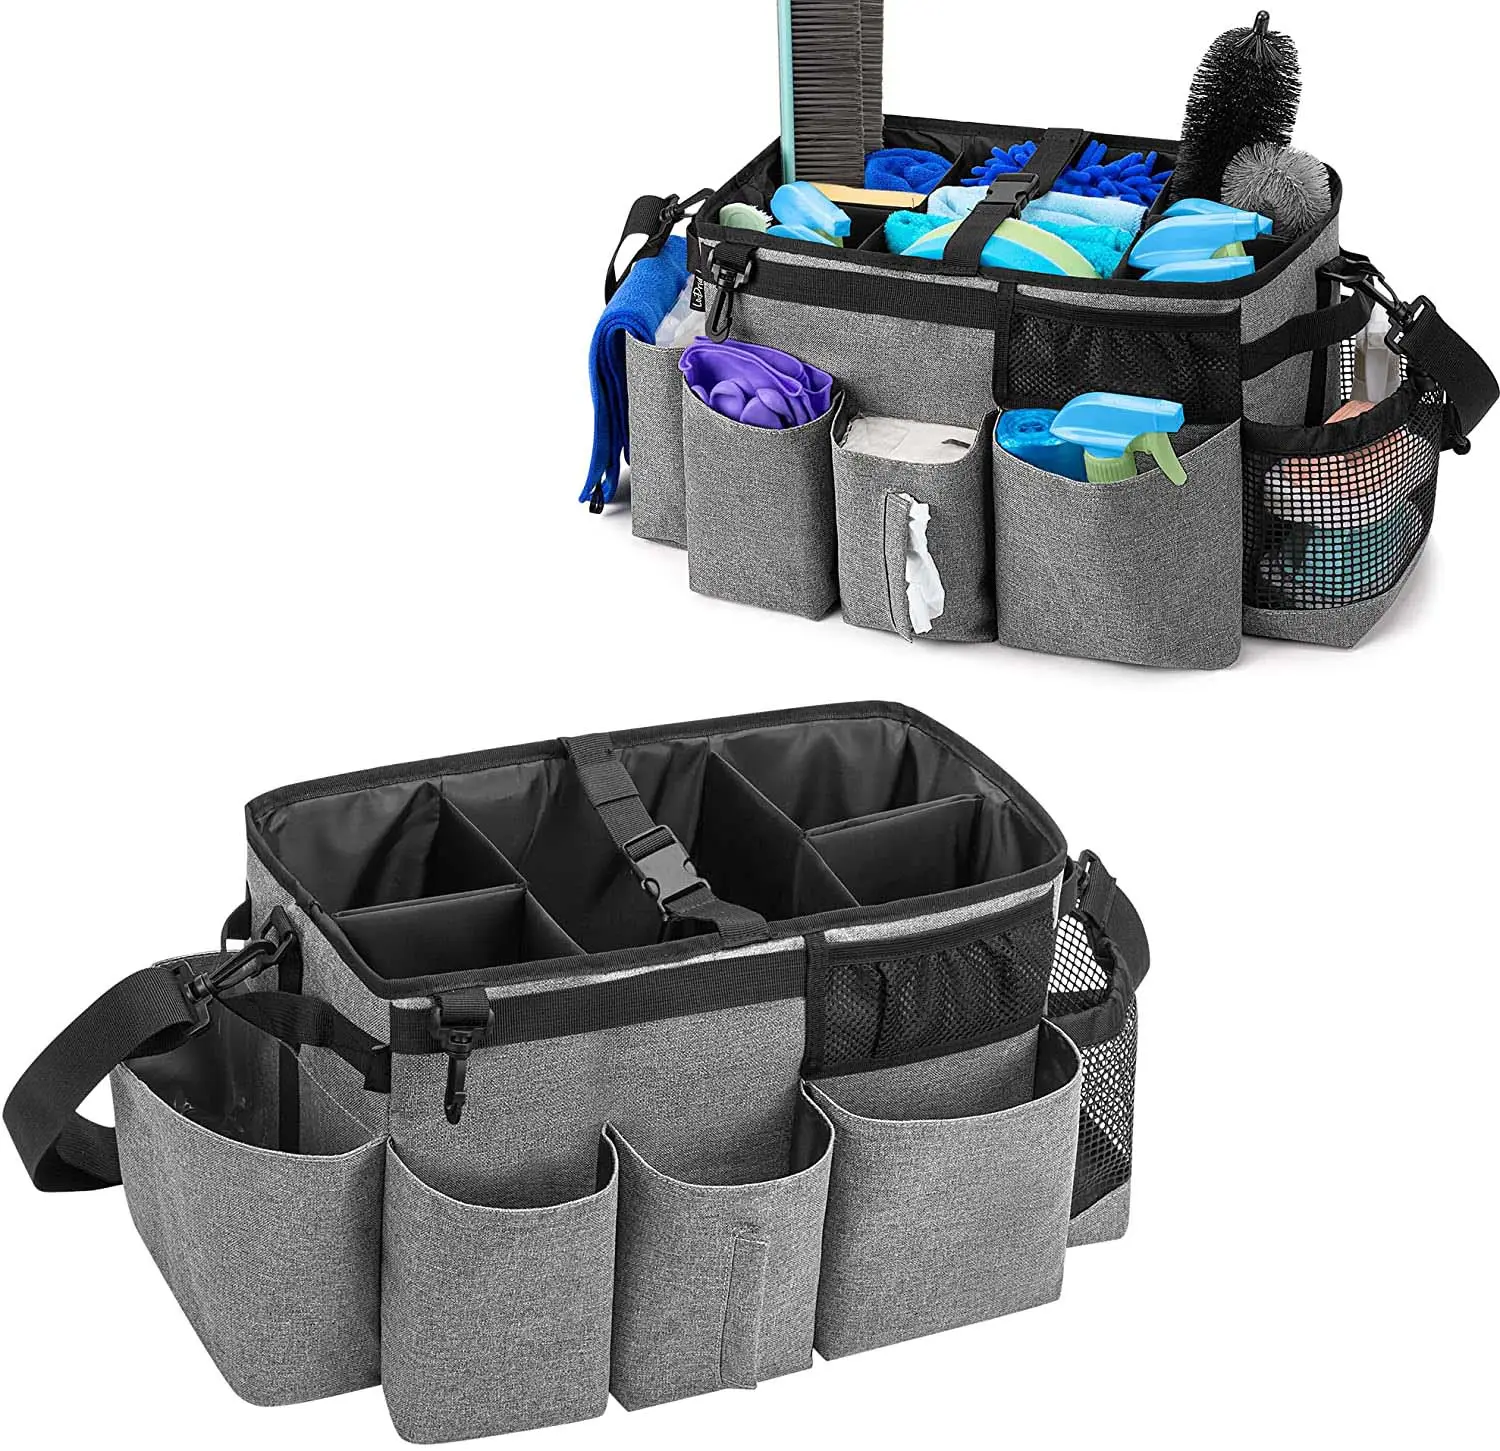 Customized Large durable leak-proof Wearable Multifunction Case Storage Bags Cleaning Caddy Bag with 4 Foldable Dividers